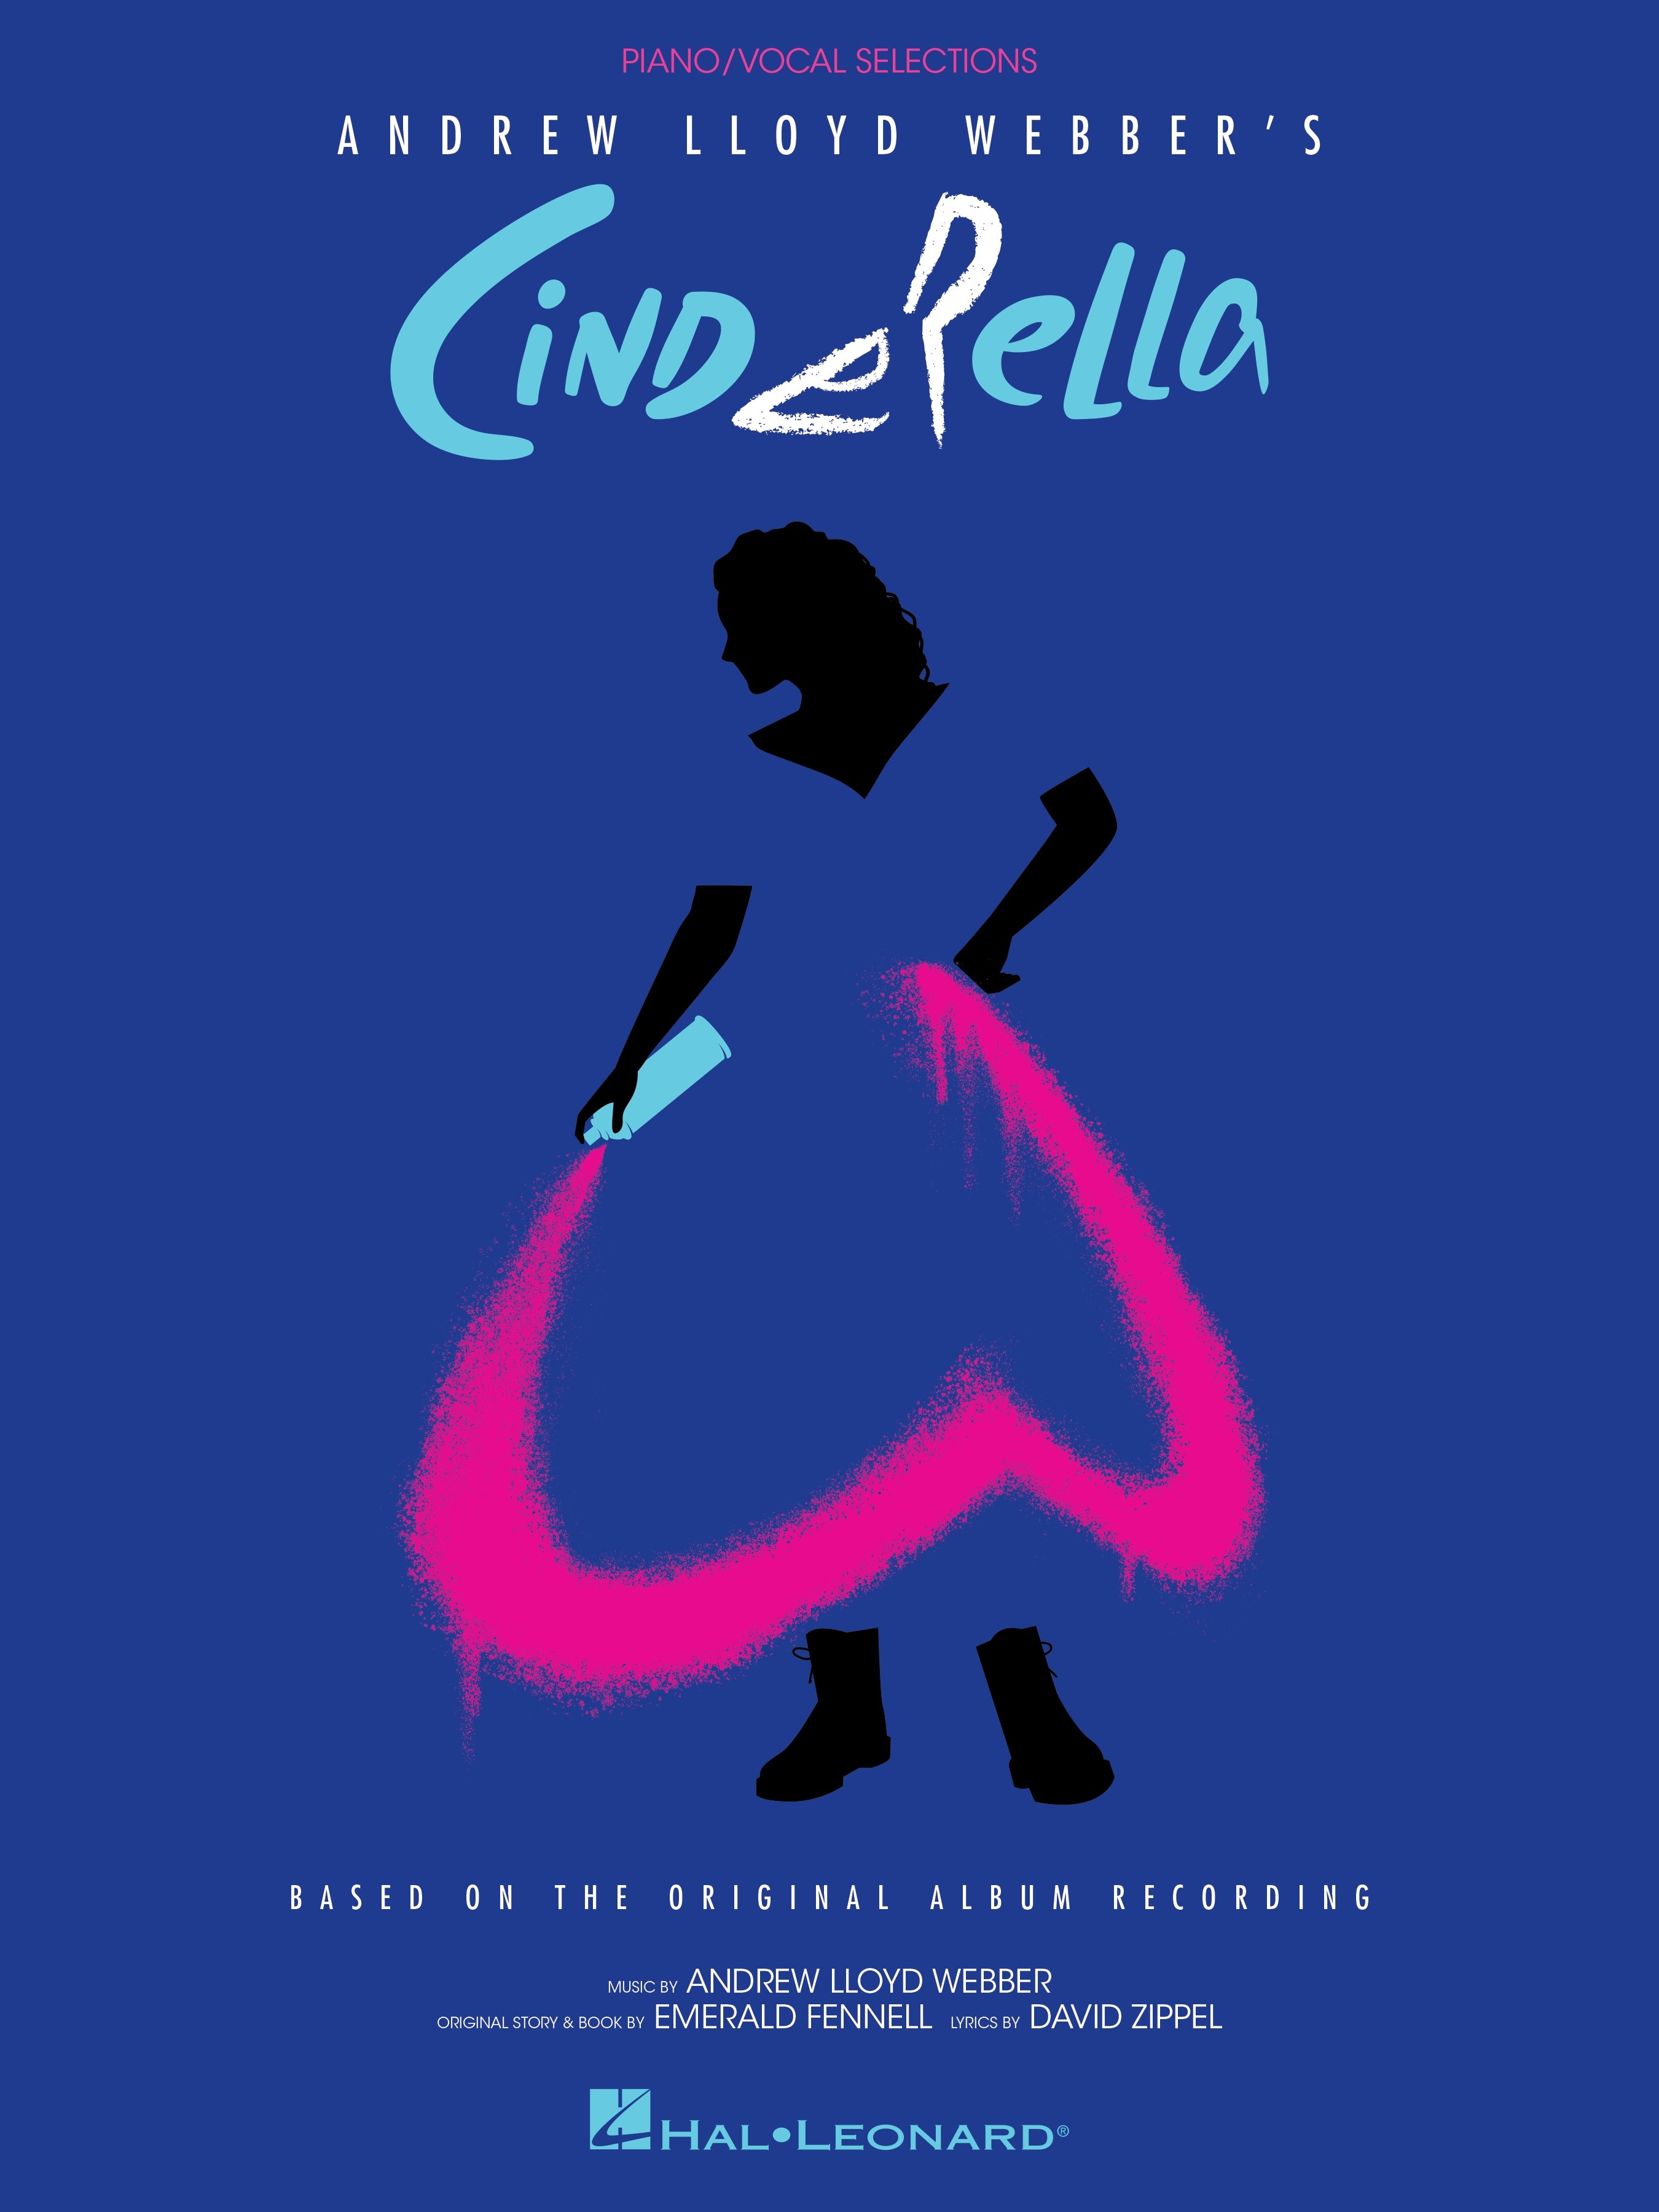 Andrew Lloyd Webber's Cinderella library edition cover